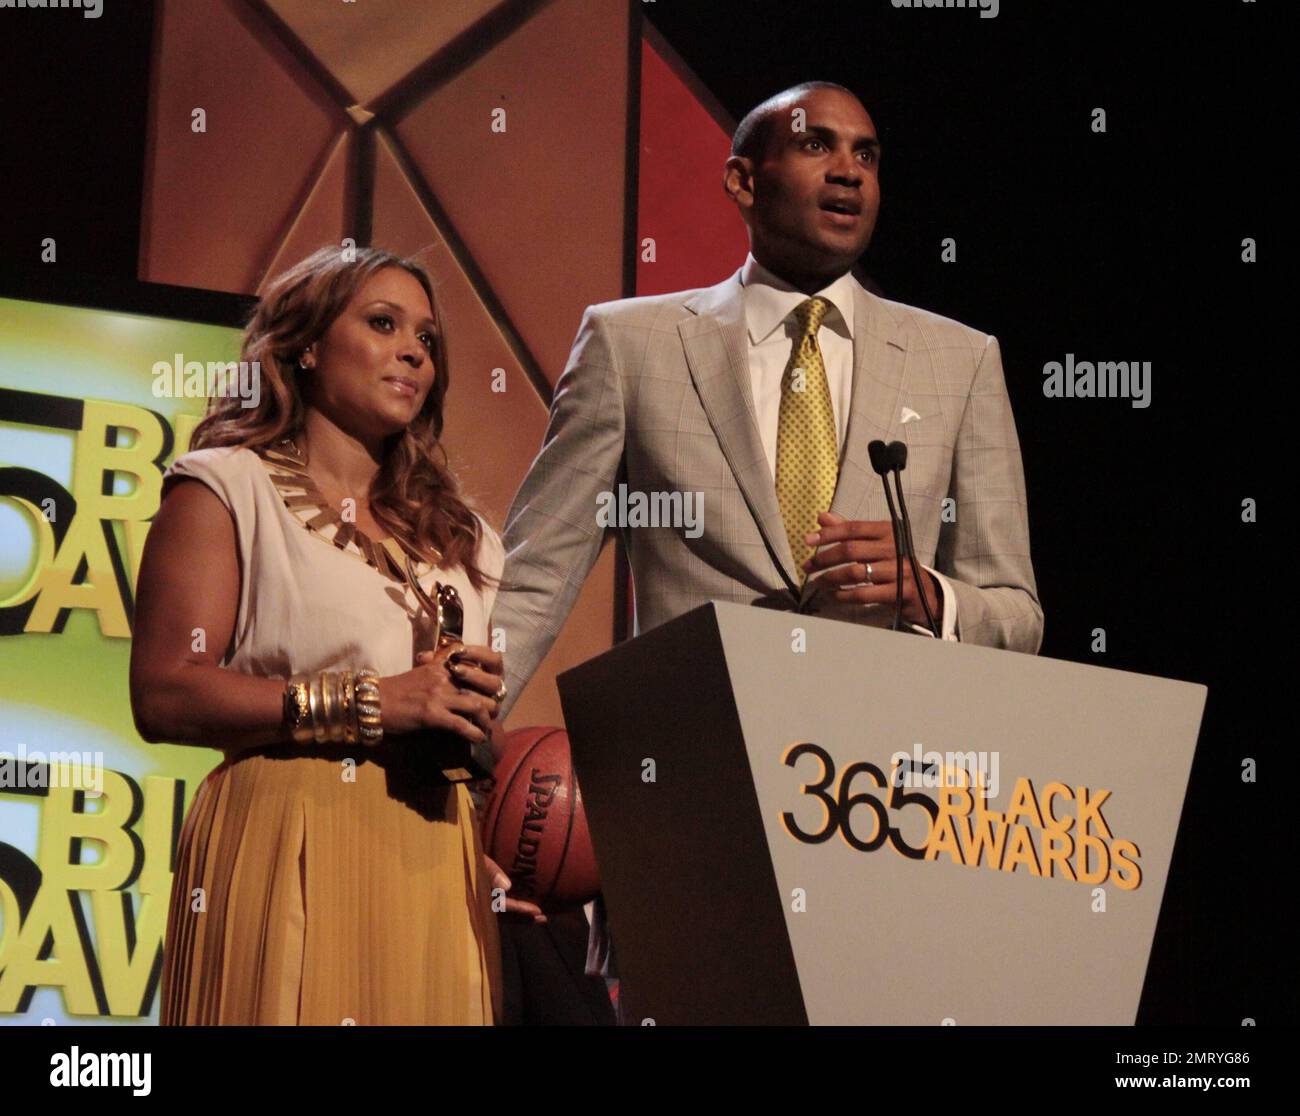 R&B singer Tamia and husband Grant Hill of the Phoenix Suns give their acceptance speech while being honored during the McDonald's 365 Black Awards held at the Mahalia Jackson Theatre in New Orleans, Louisiana. 6th July 2012. Stock Photo